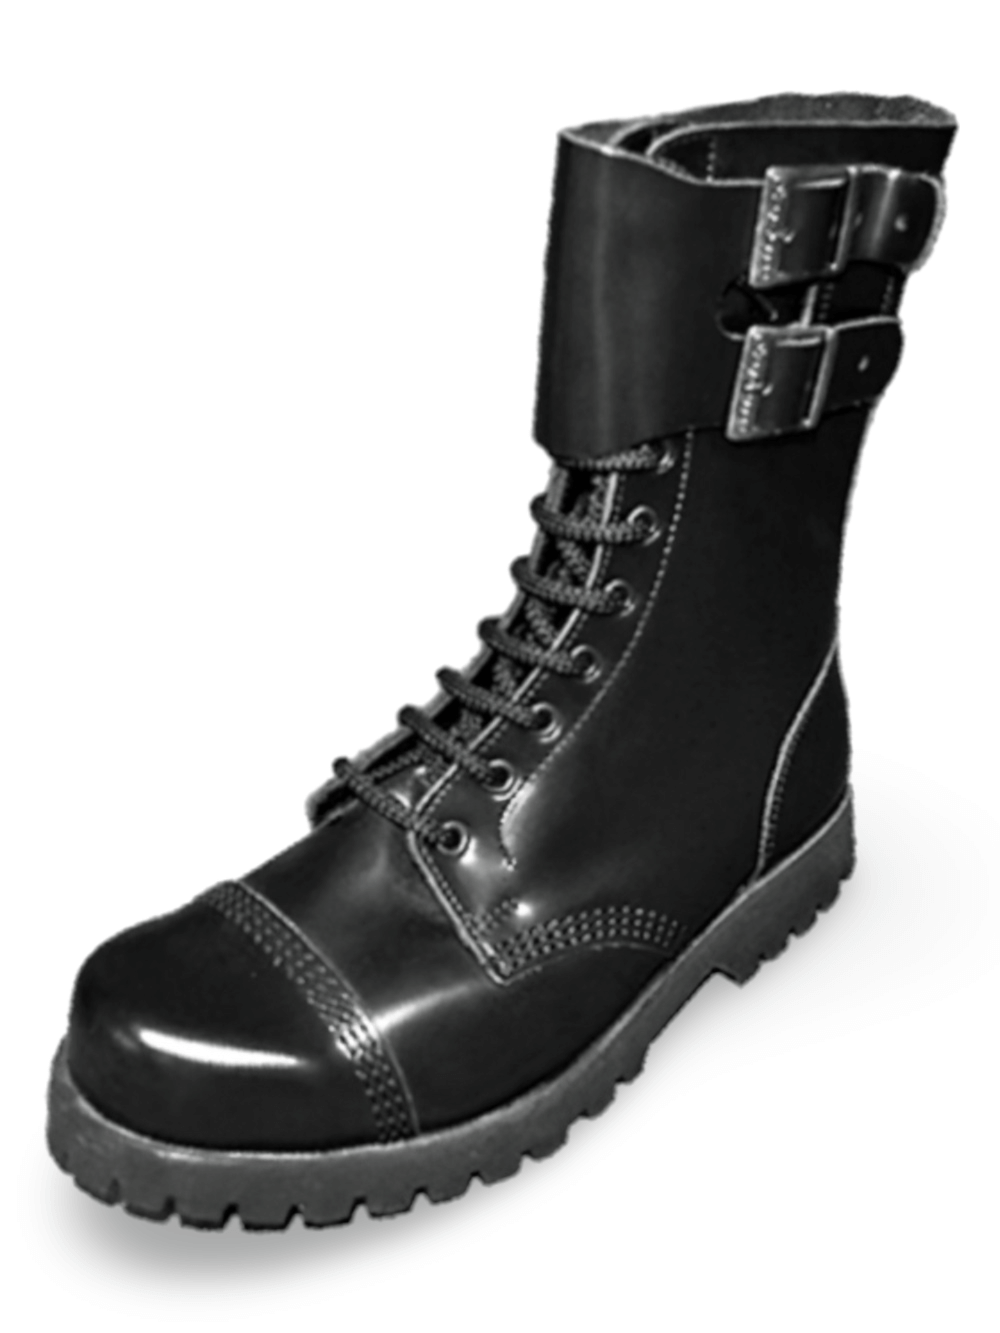 Black 10-Eyelet Rangers with Buckles and Lace-up